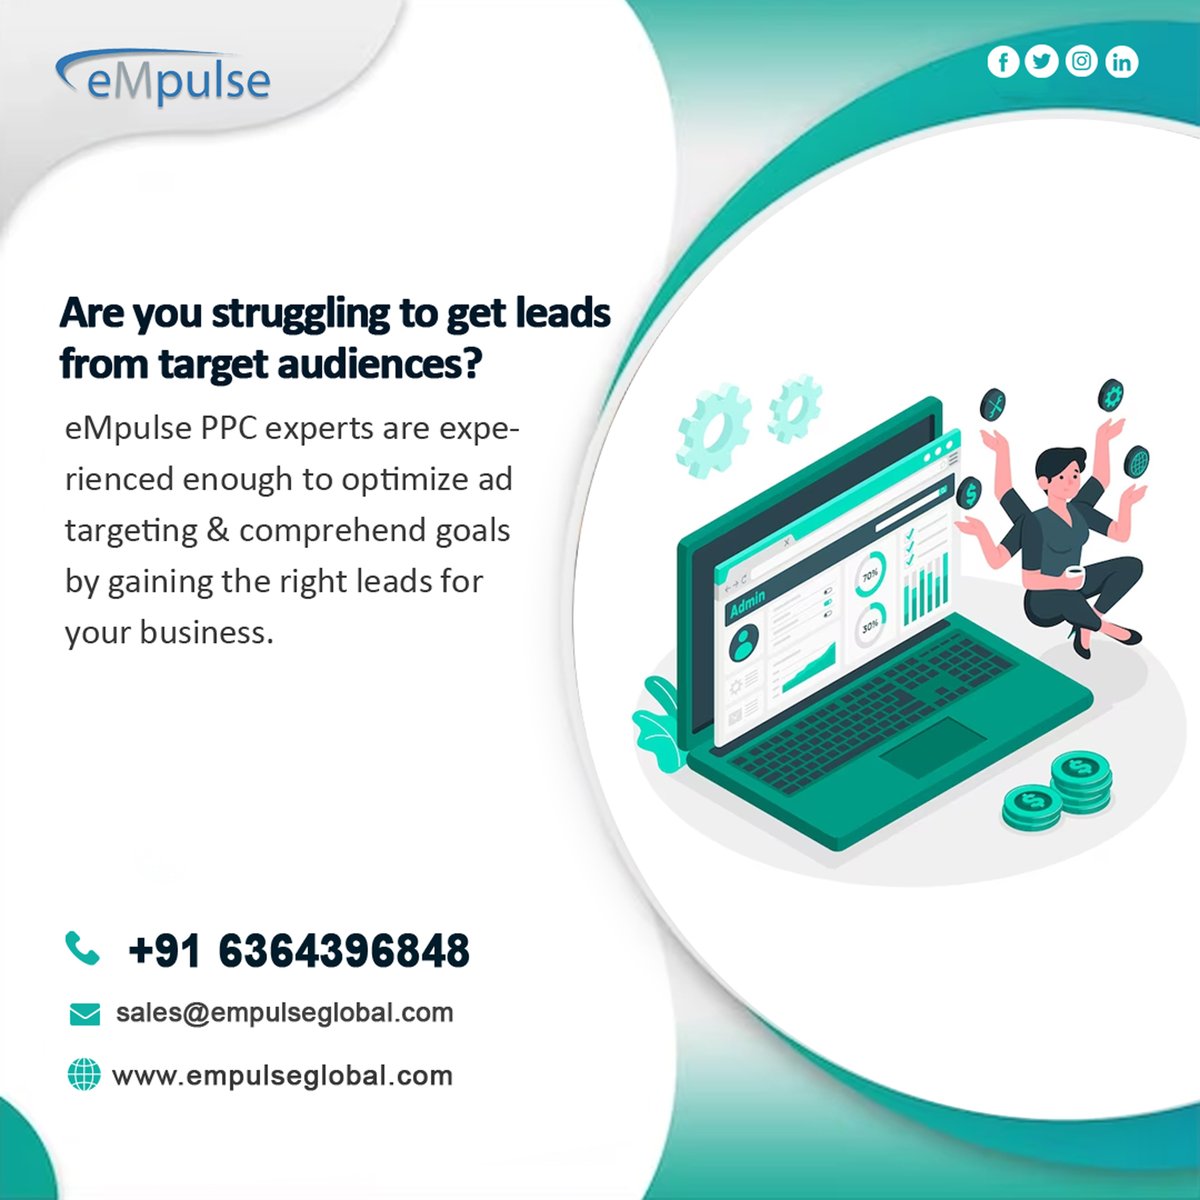 Are you struggling to get leads from target audiences? eMpulse PPC experts are experienced enough to optimize ad targeting & comprehend goals by gaining the right leads for your business. #empulseglobal #digitalmarketing #PPC #googleadsmarketing #leadgeneration